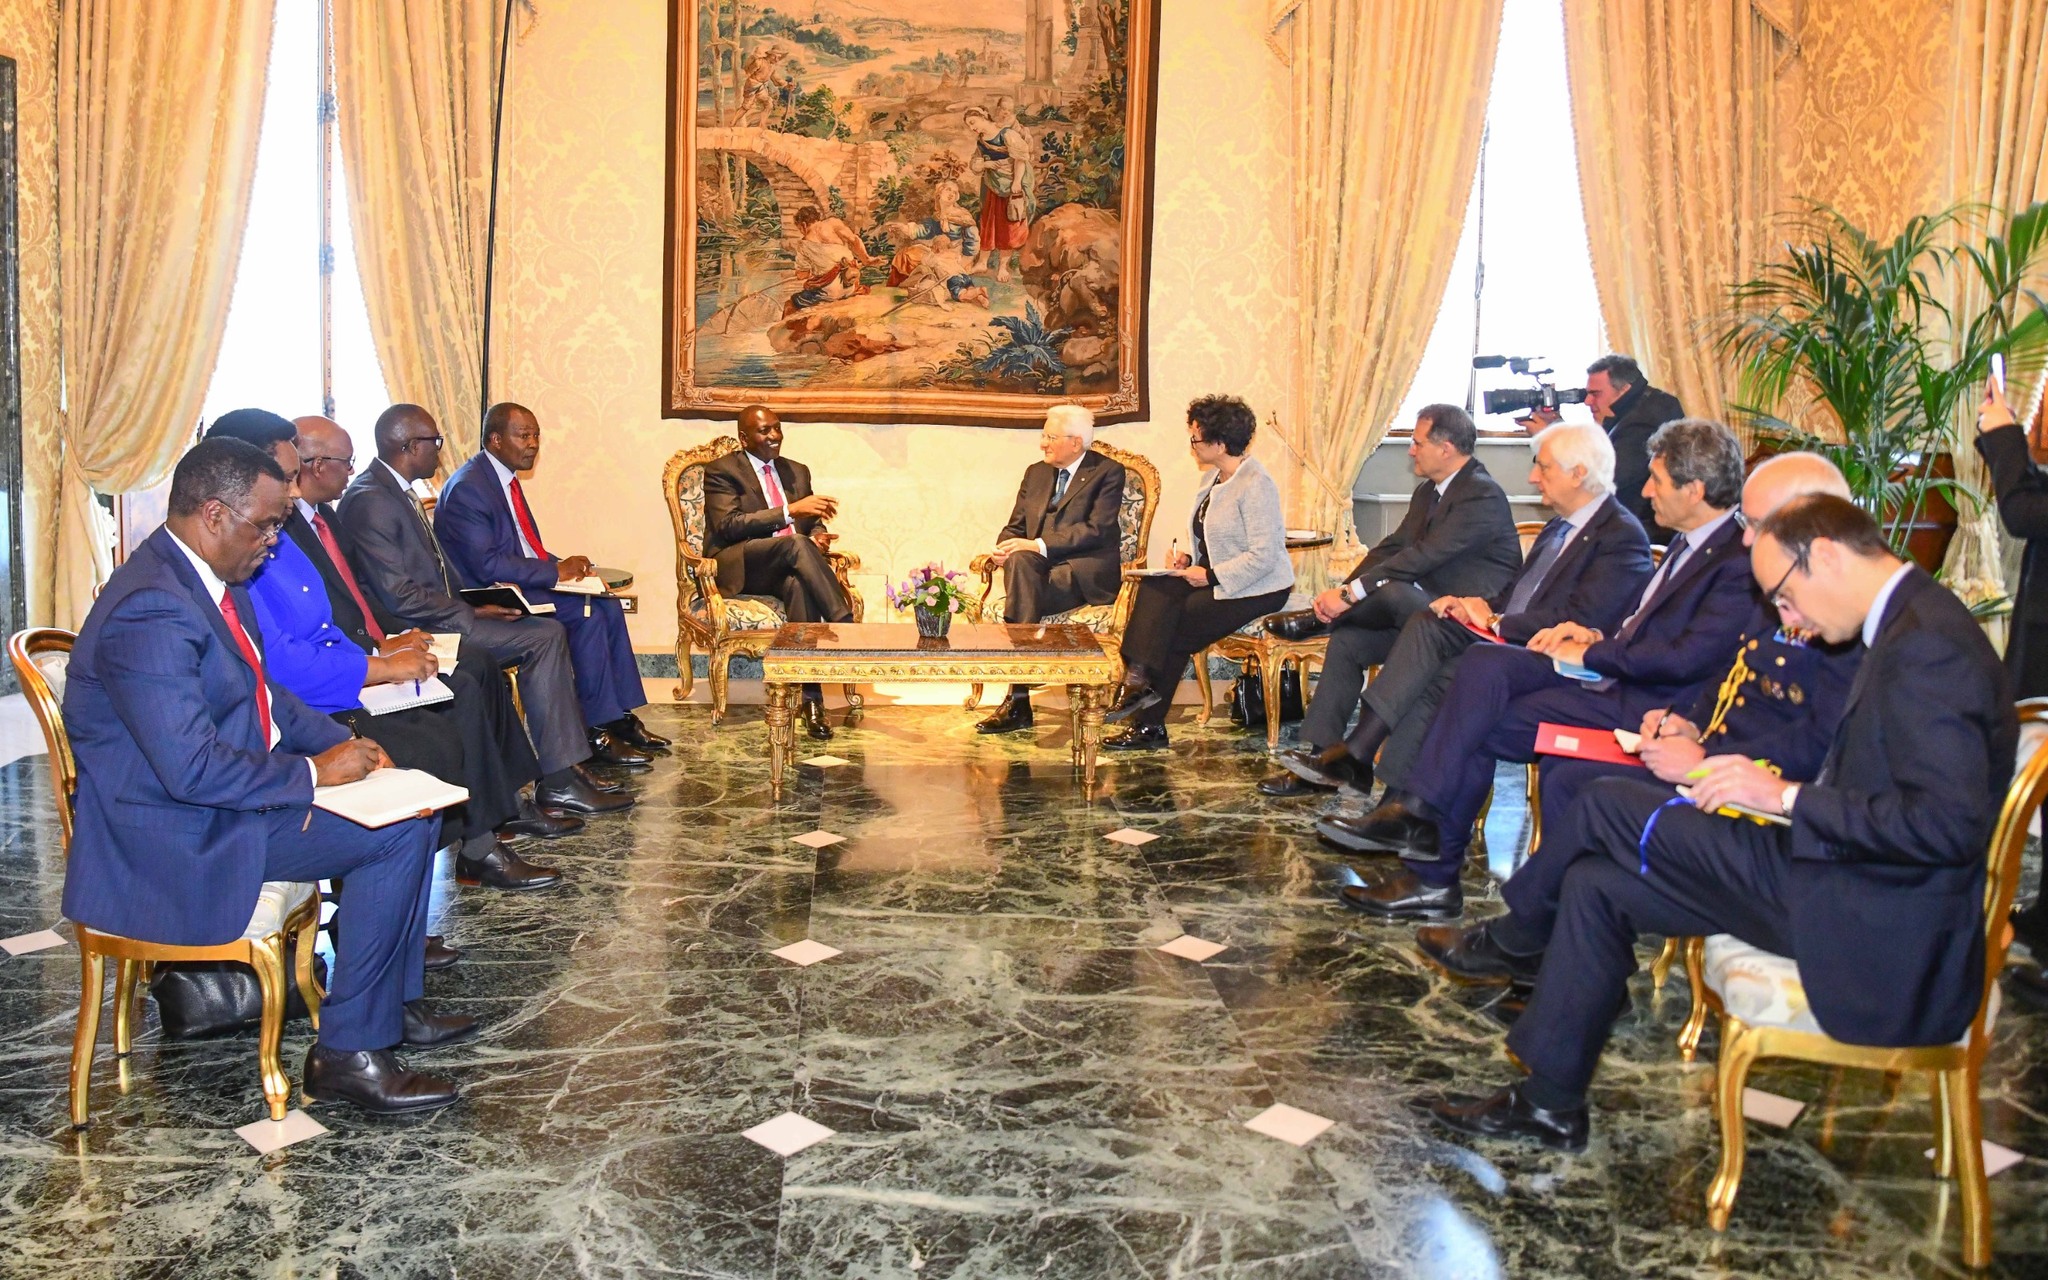 President Ruto Calls for Peace in Africa at Italy-Africa Summit